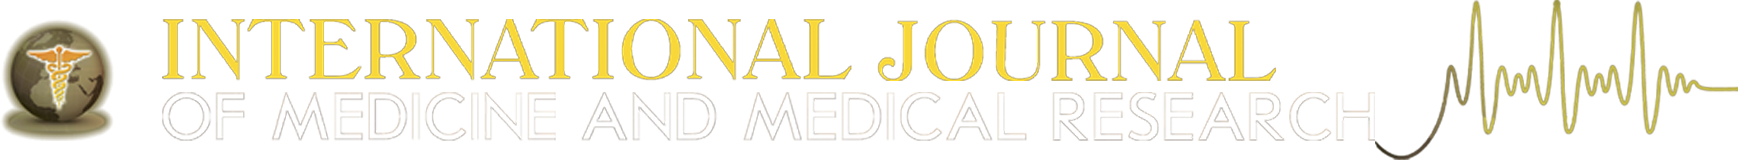 International Journal of Medicine and Medical Research